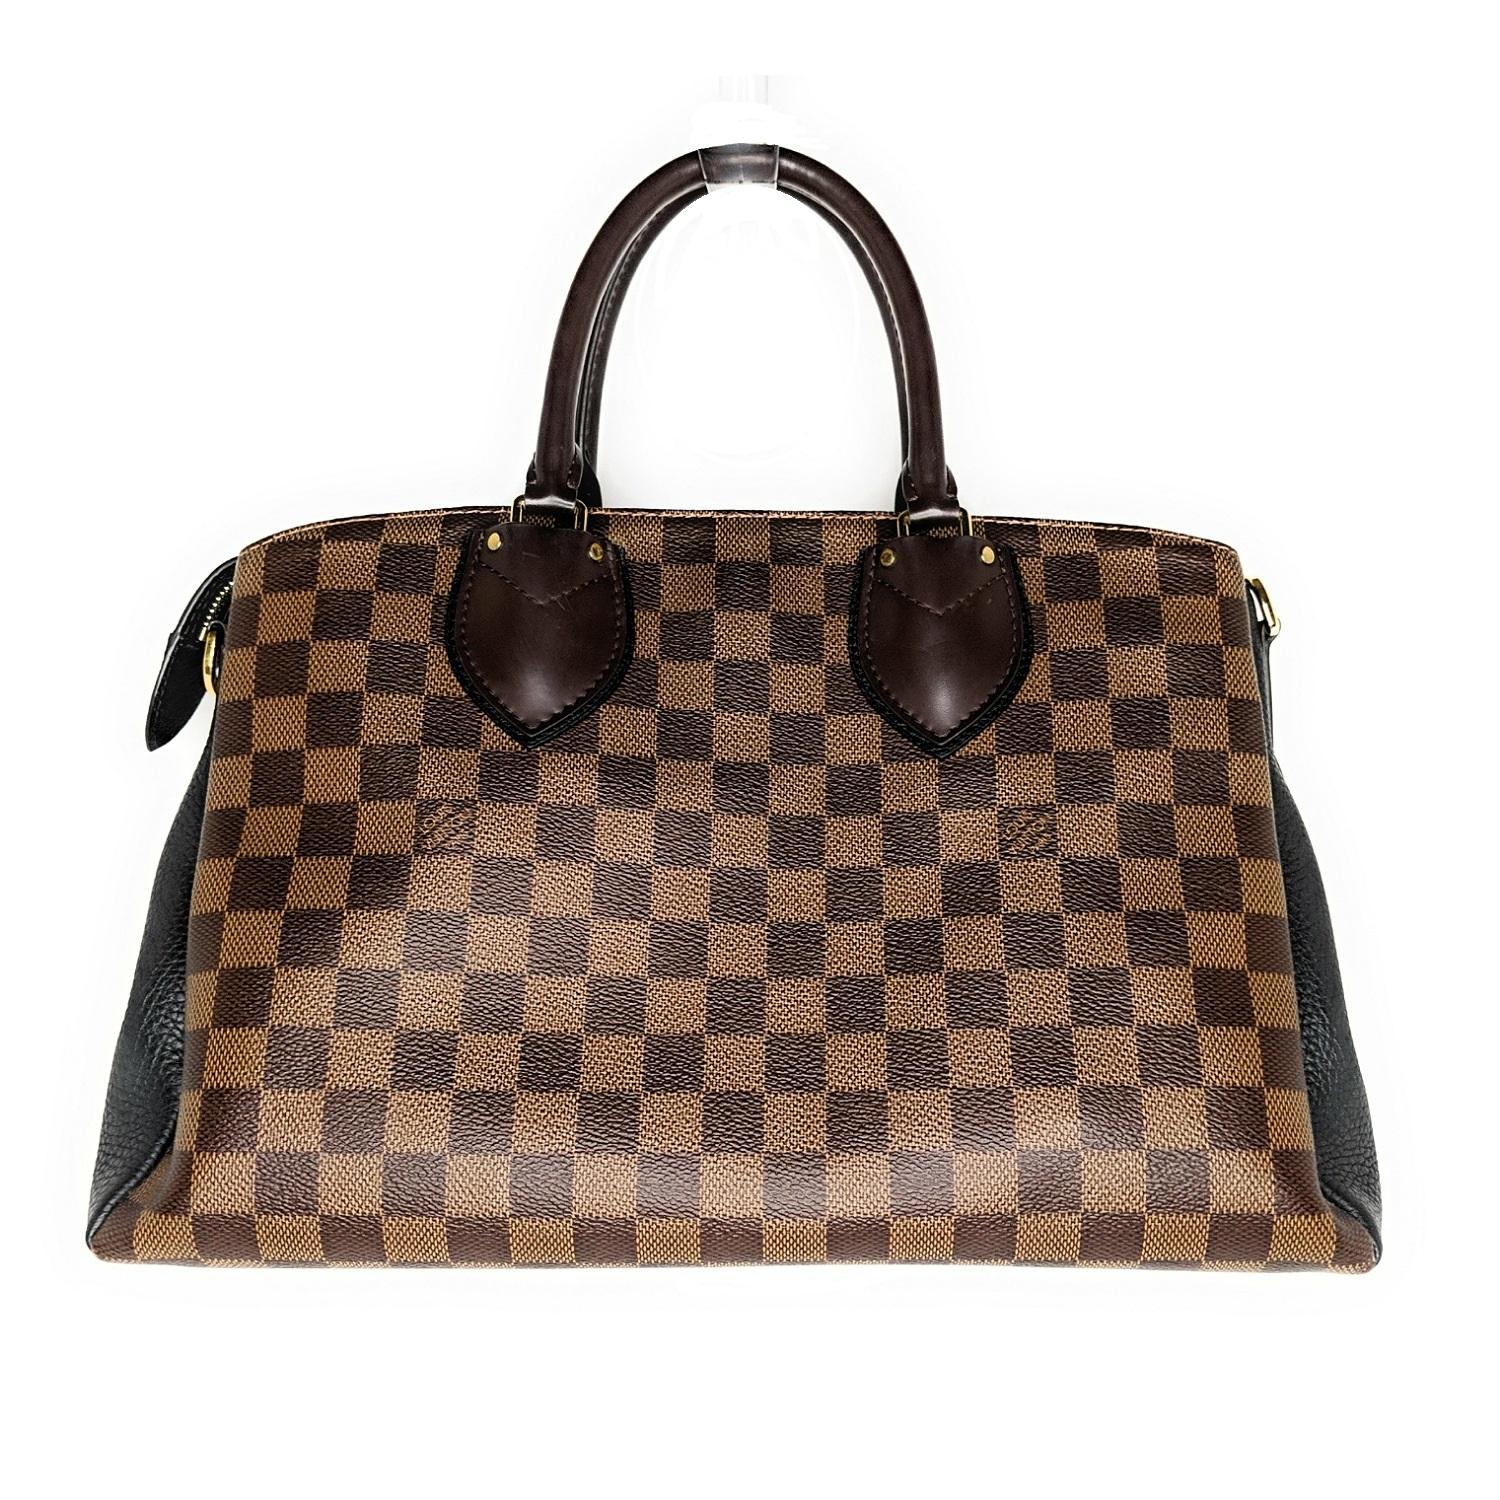 Chocolate and brown Damier Ebene coated canvas Louis Vuitton Normandy with gold-tone hardware, single flat optional leather shoulder strap, dual rolled leather top handles, tonal leather trim, black leather trim, protective feet at base, three